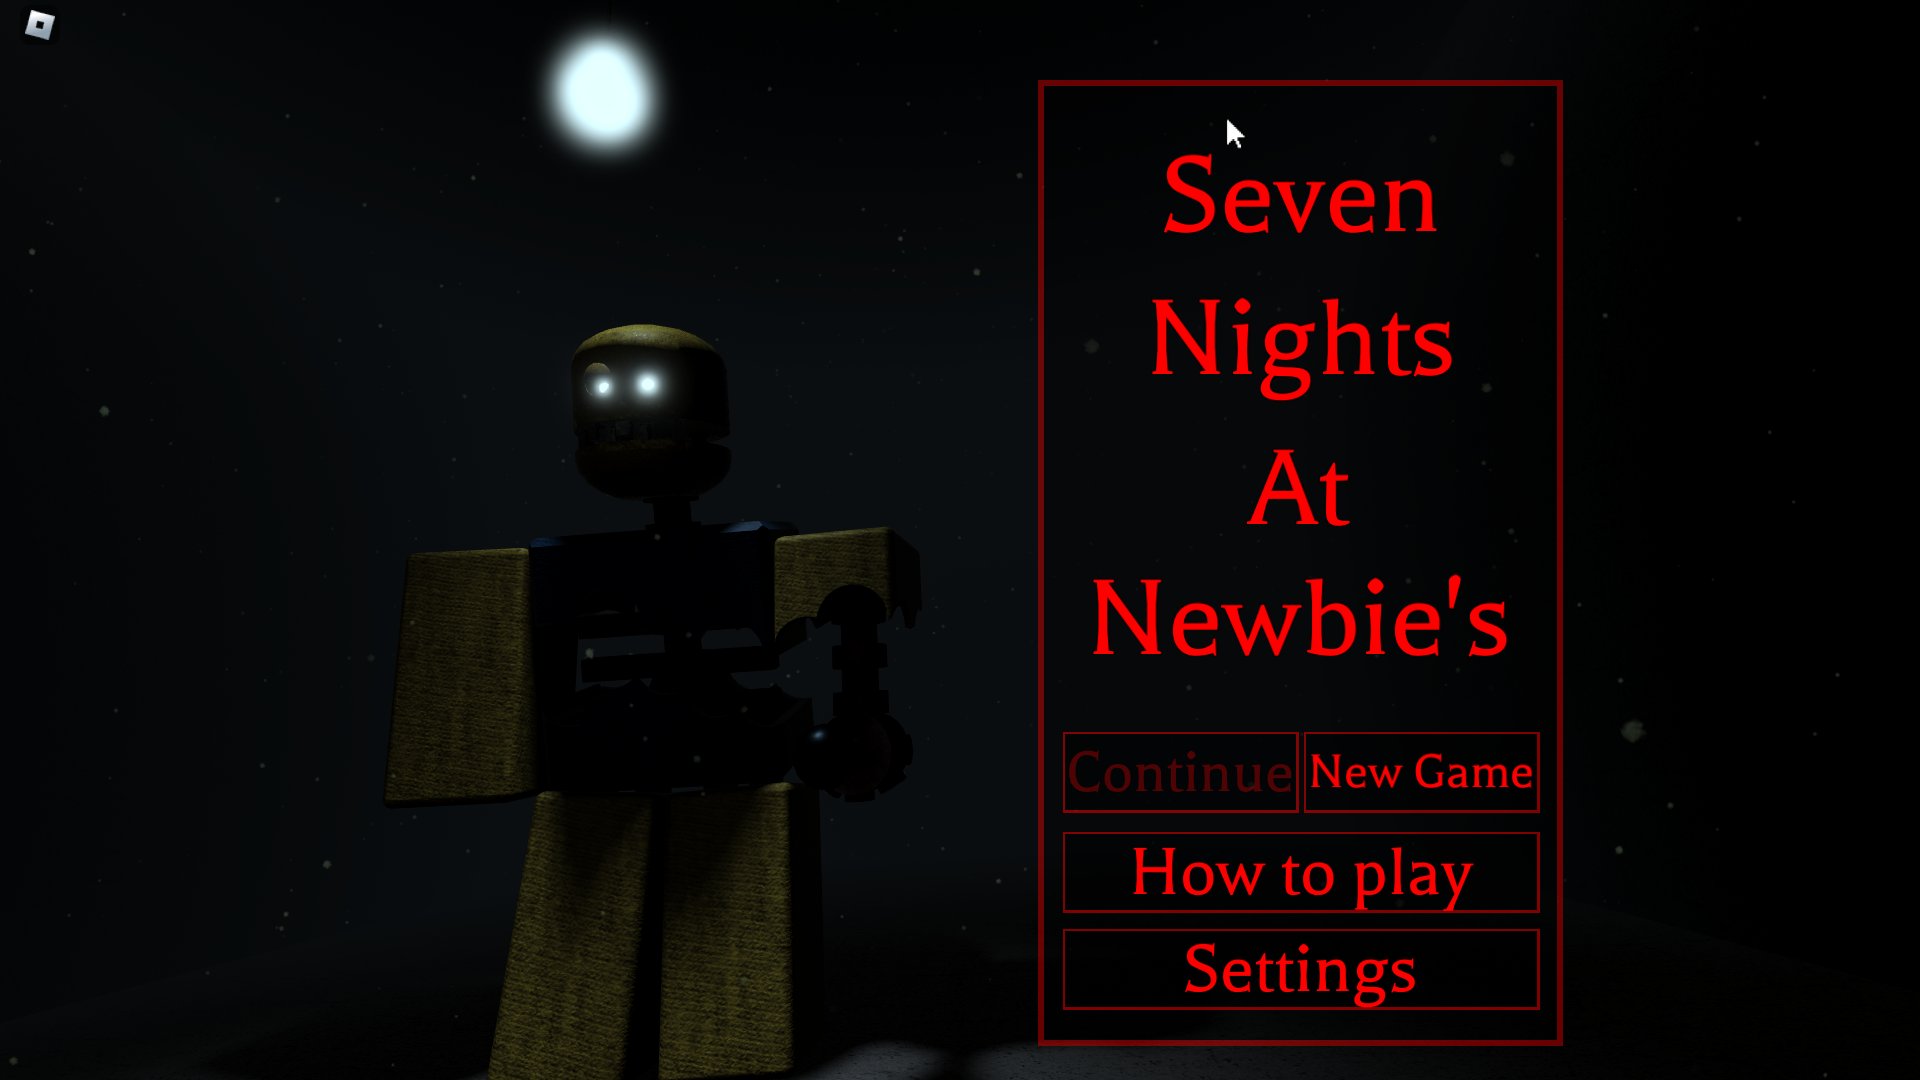 Roblox Underrated Games. on X: #RobloxDev #Roblox =Game Recommendation=  Seven nights at newbies full game by dodman531.  Link:  / X